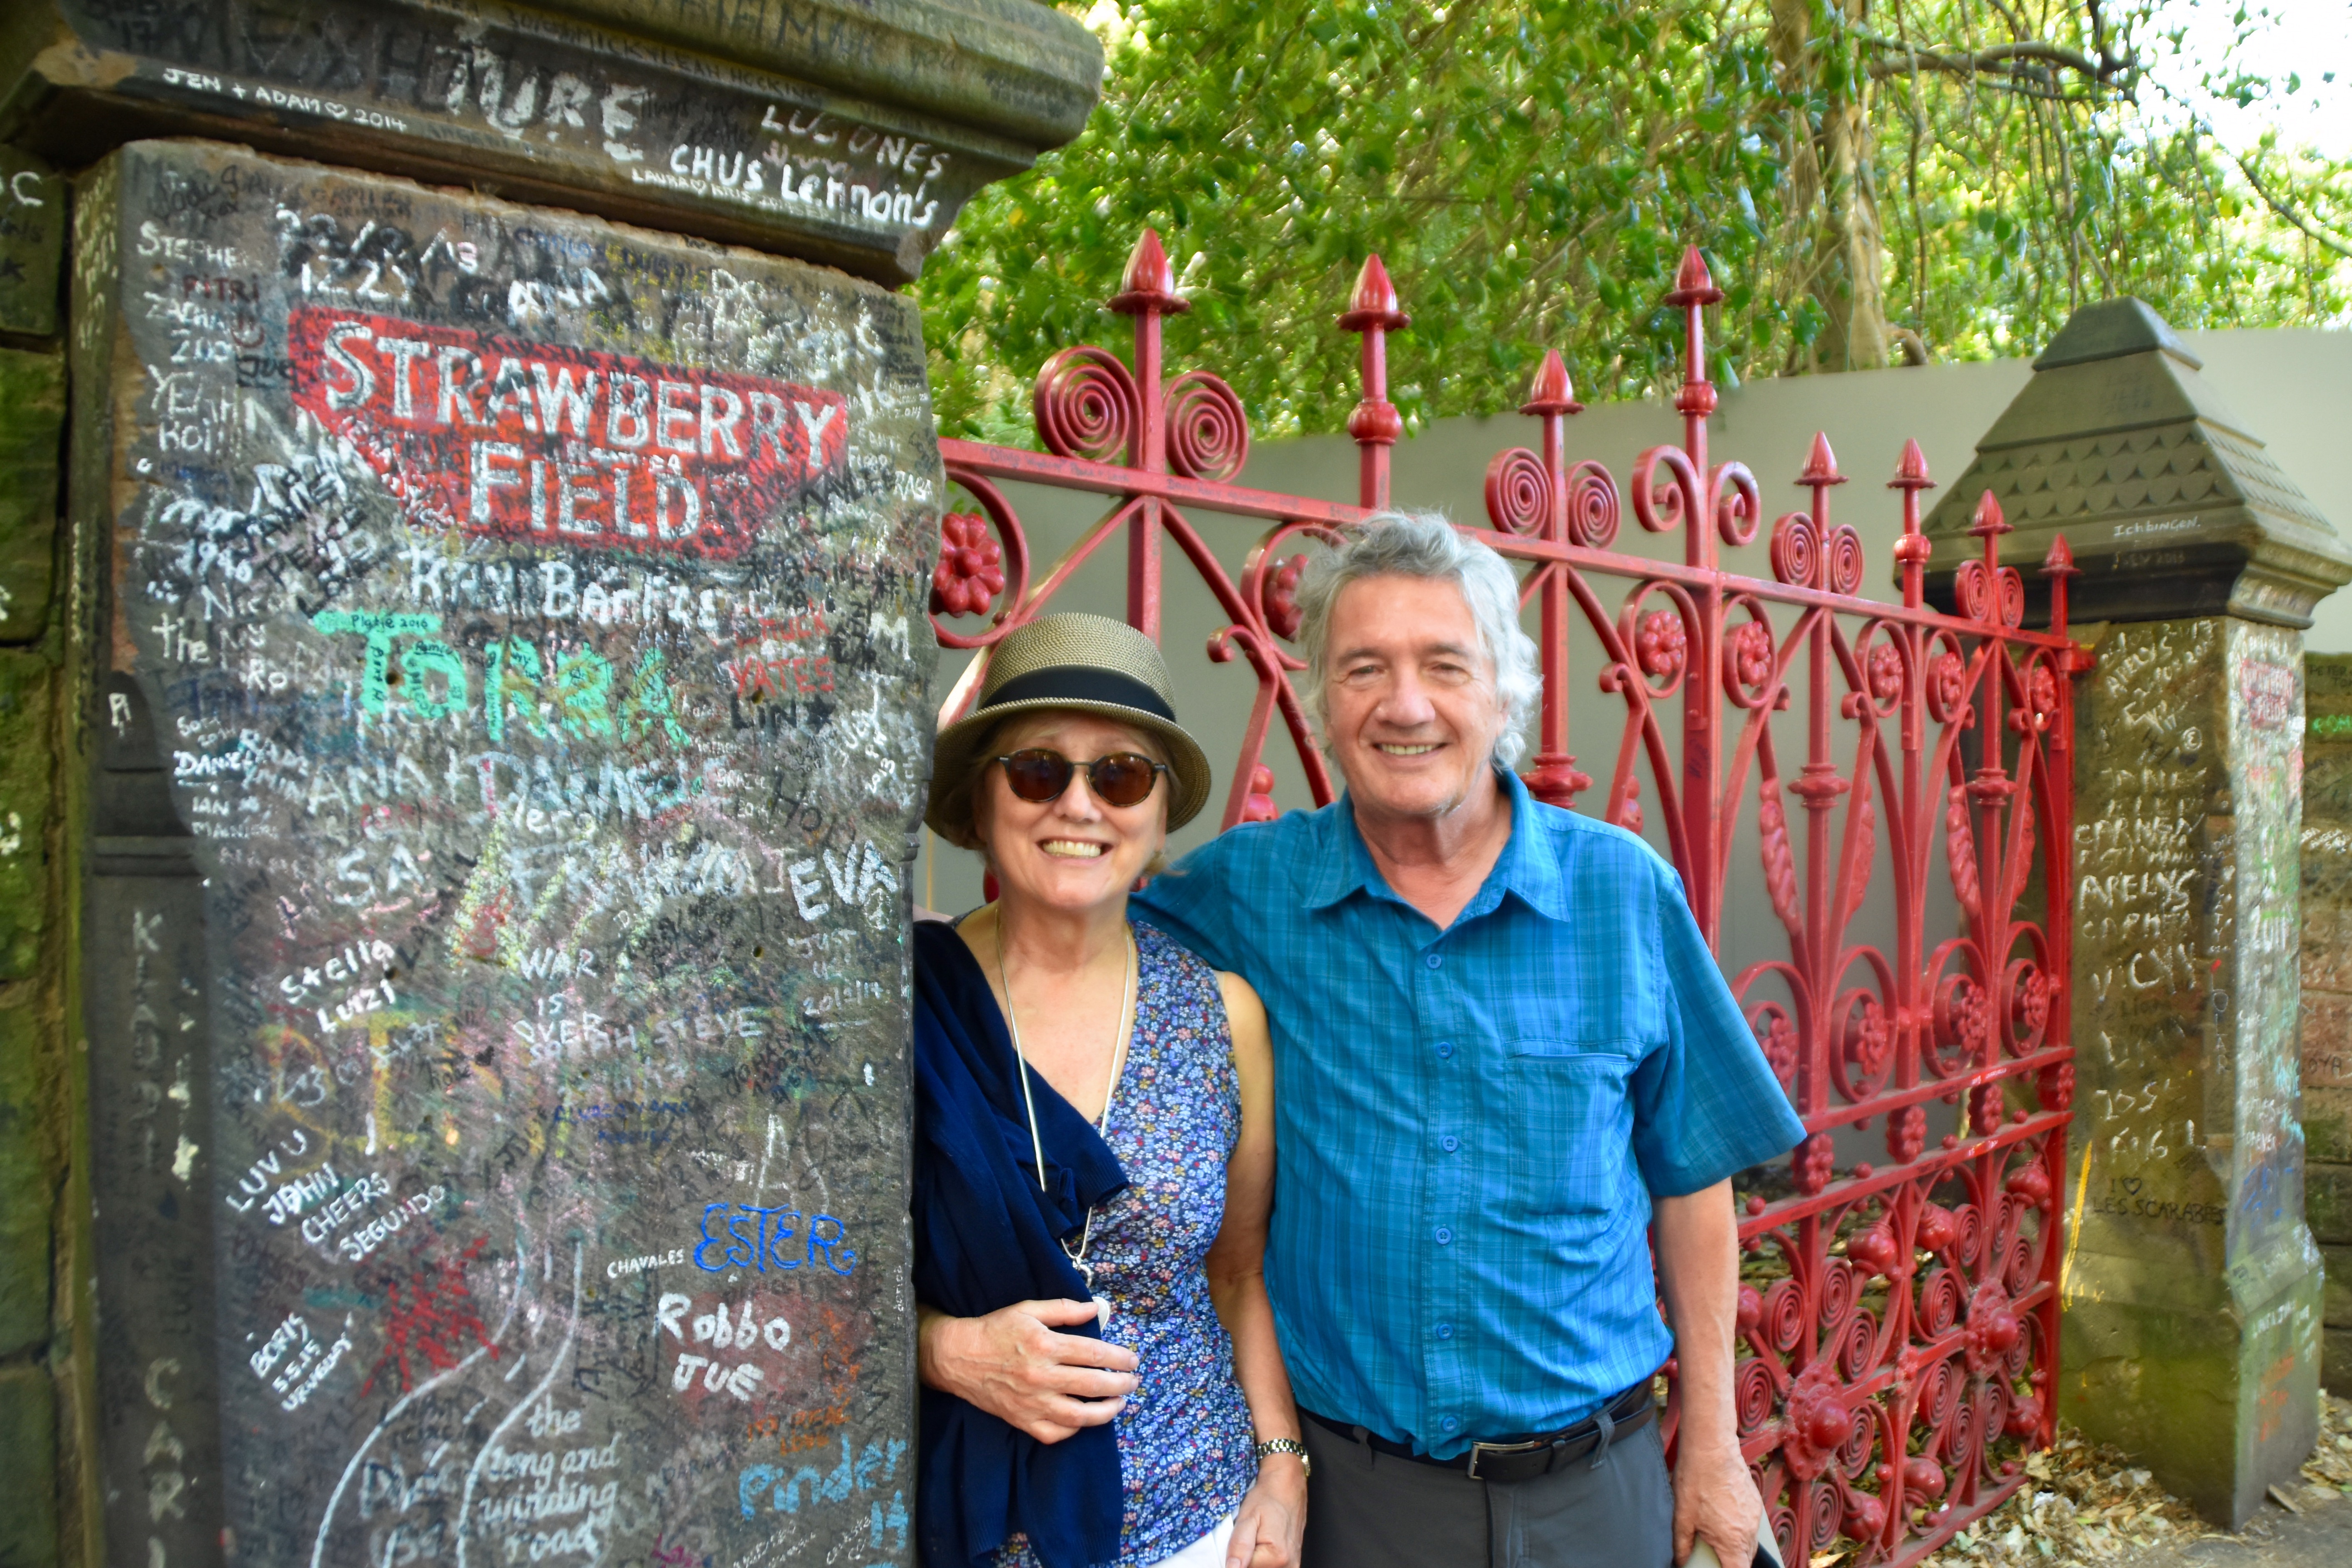 At Strawberry Field, Beatles Tour